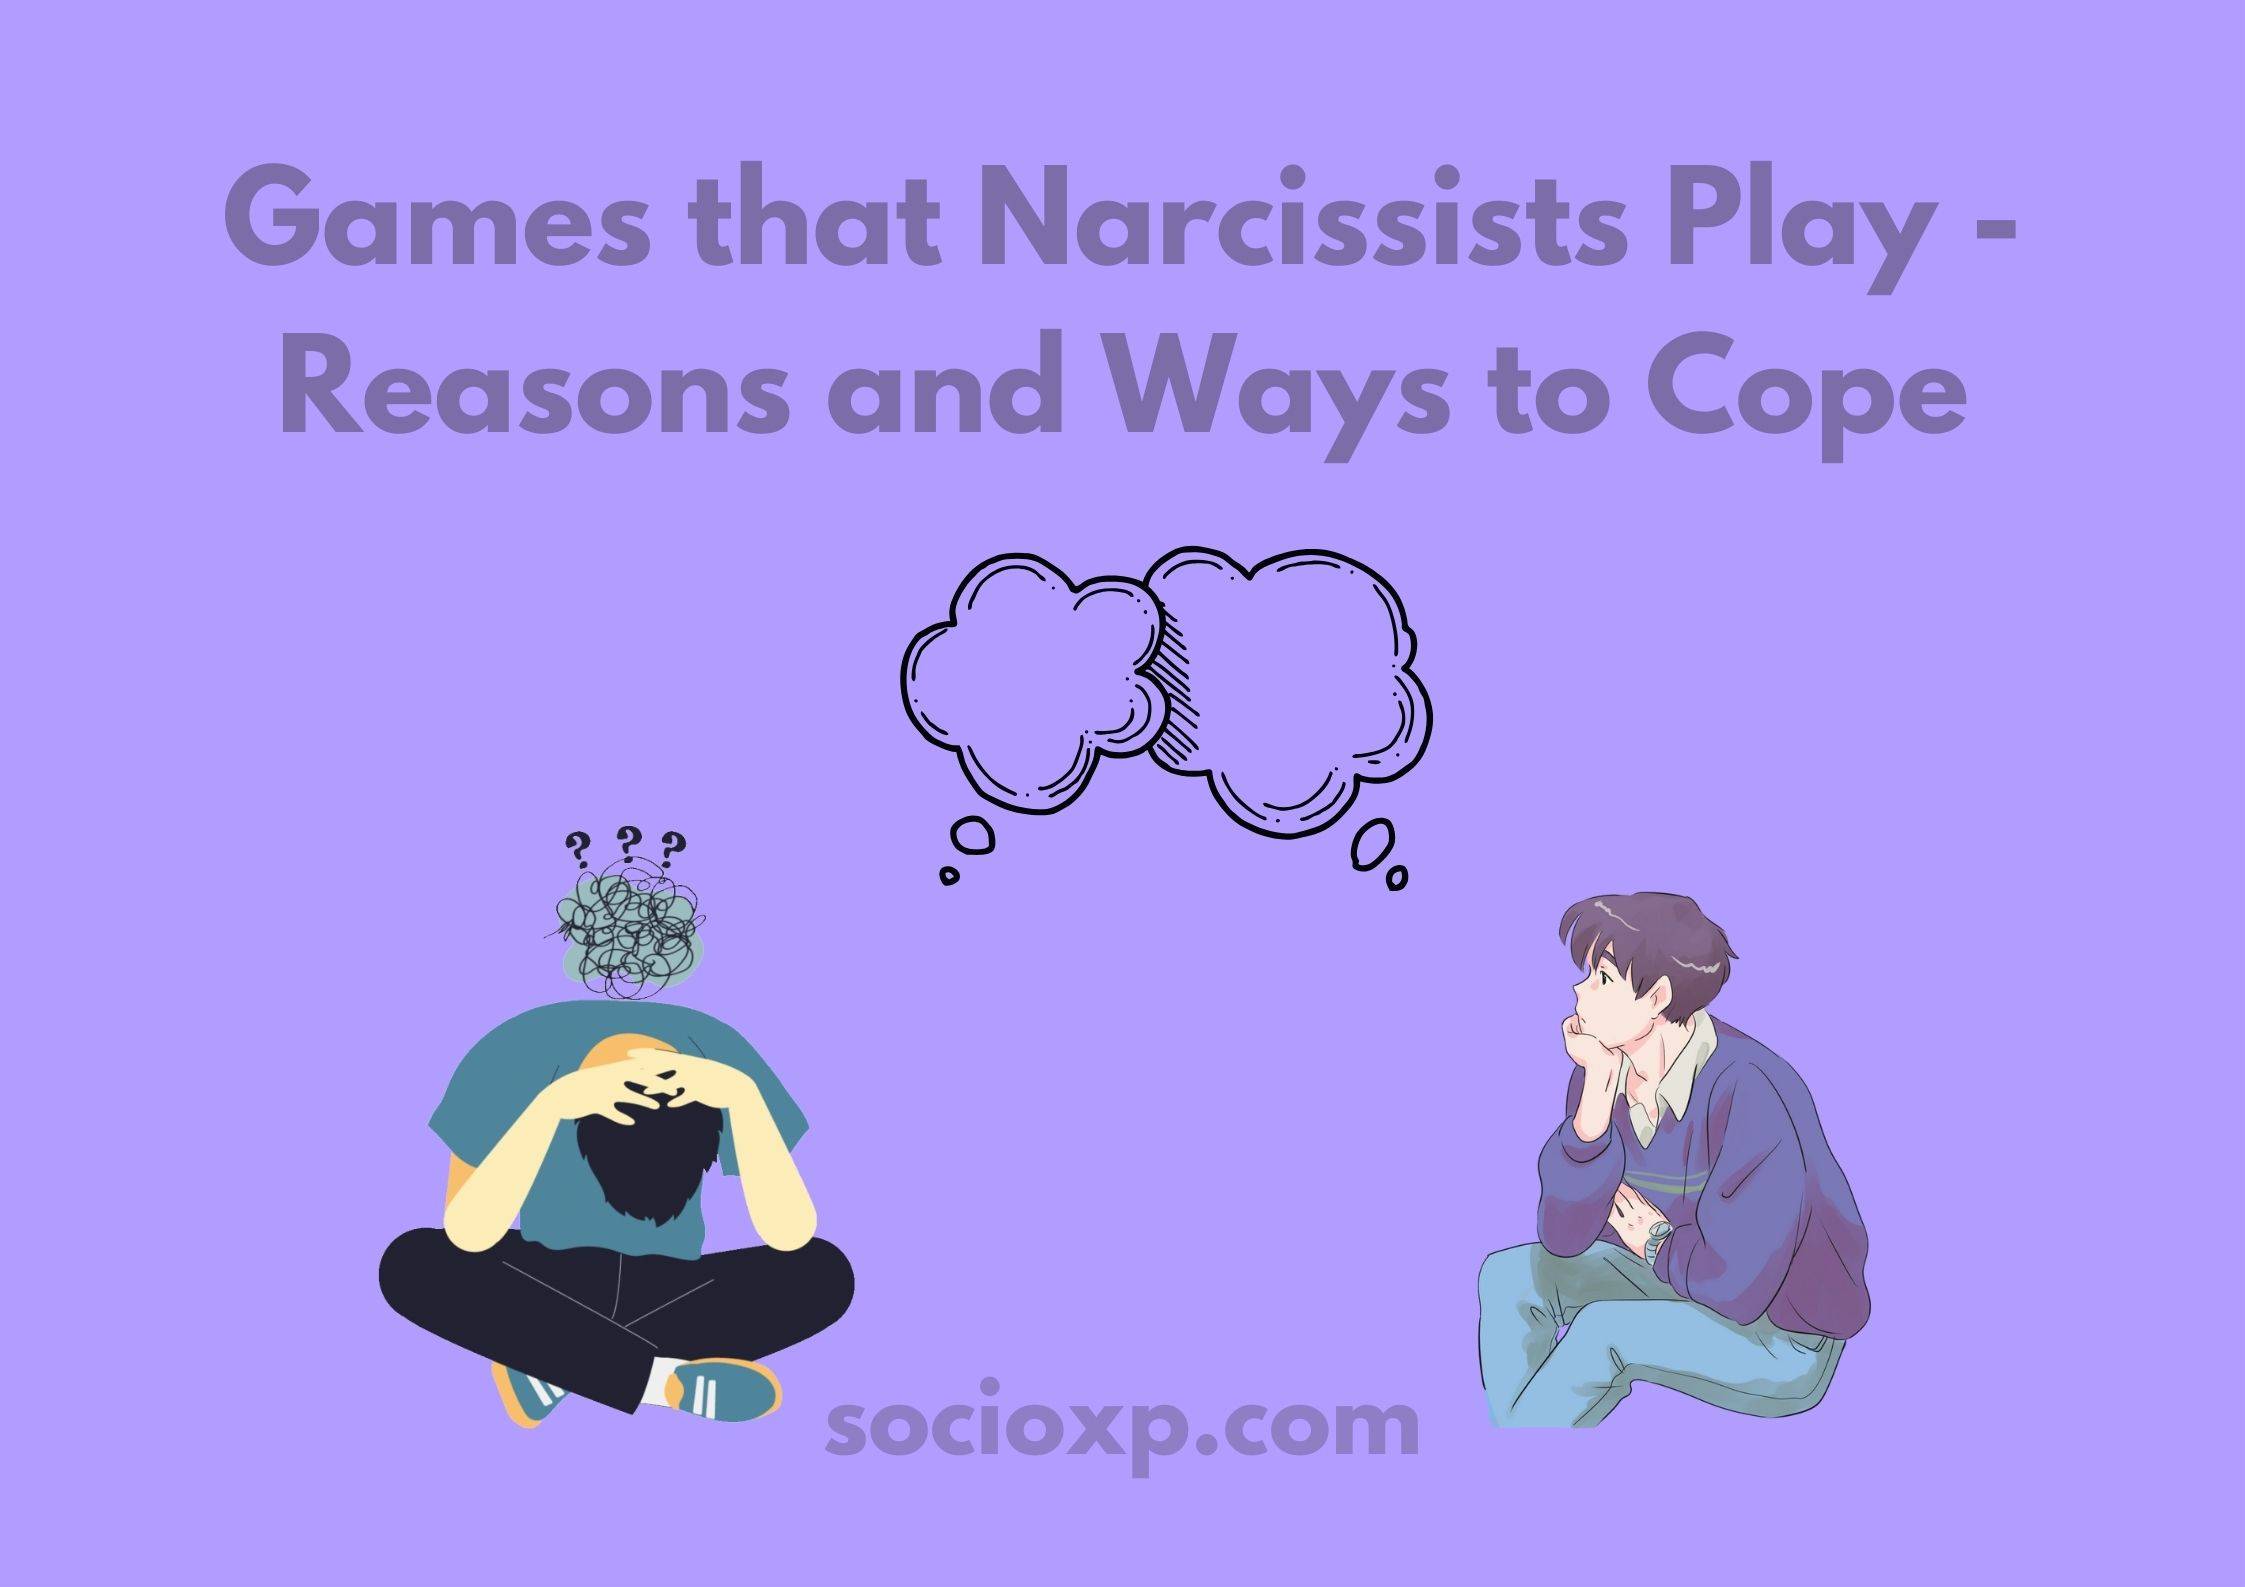 Games that Narcissists Play - Reasons and Ways to Cope